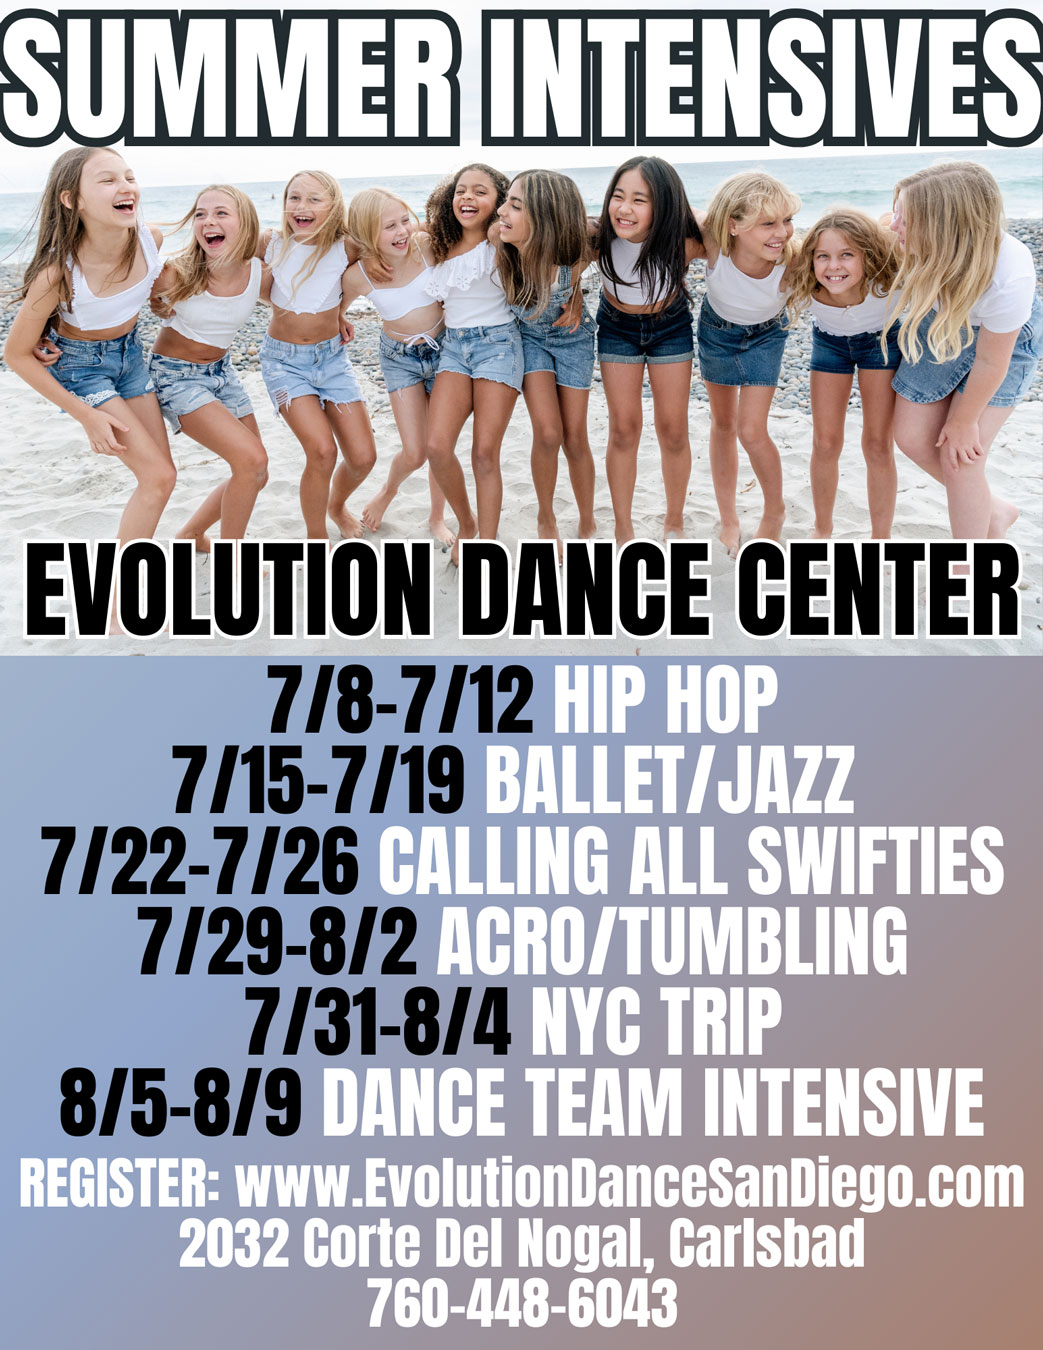 Summer Intensive dance camp flyer with teen dancers featured on the flyer.